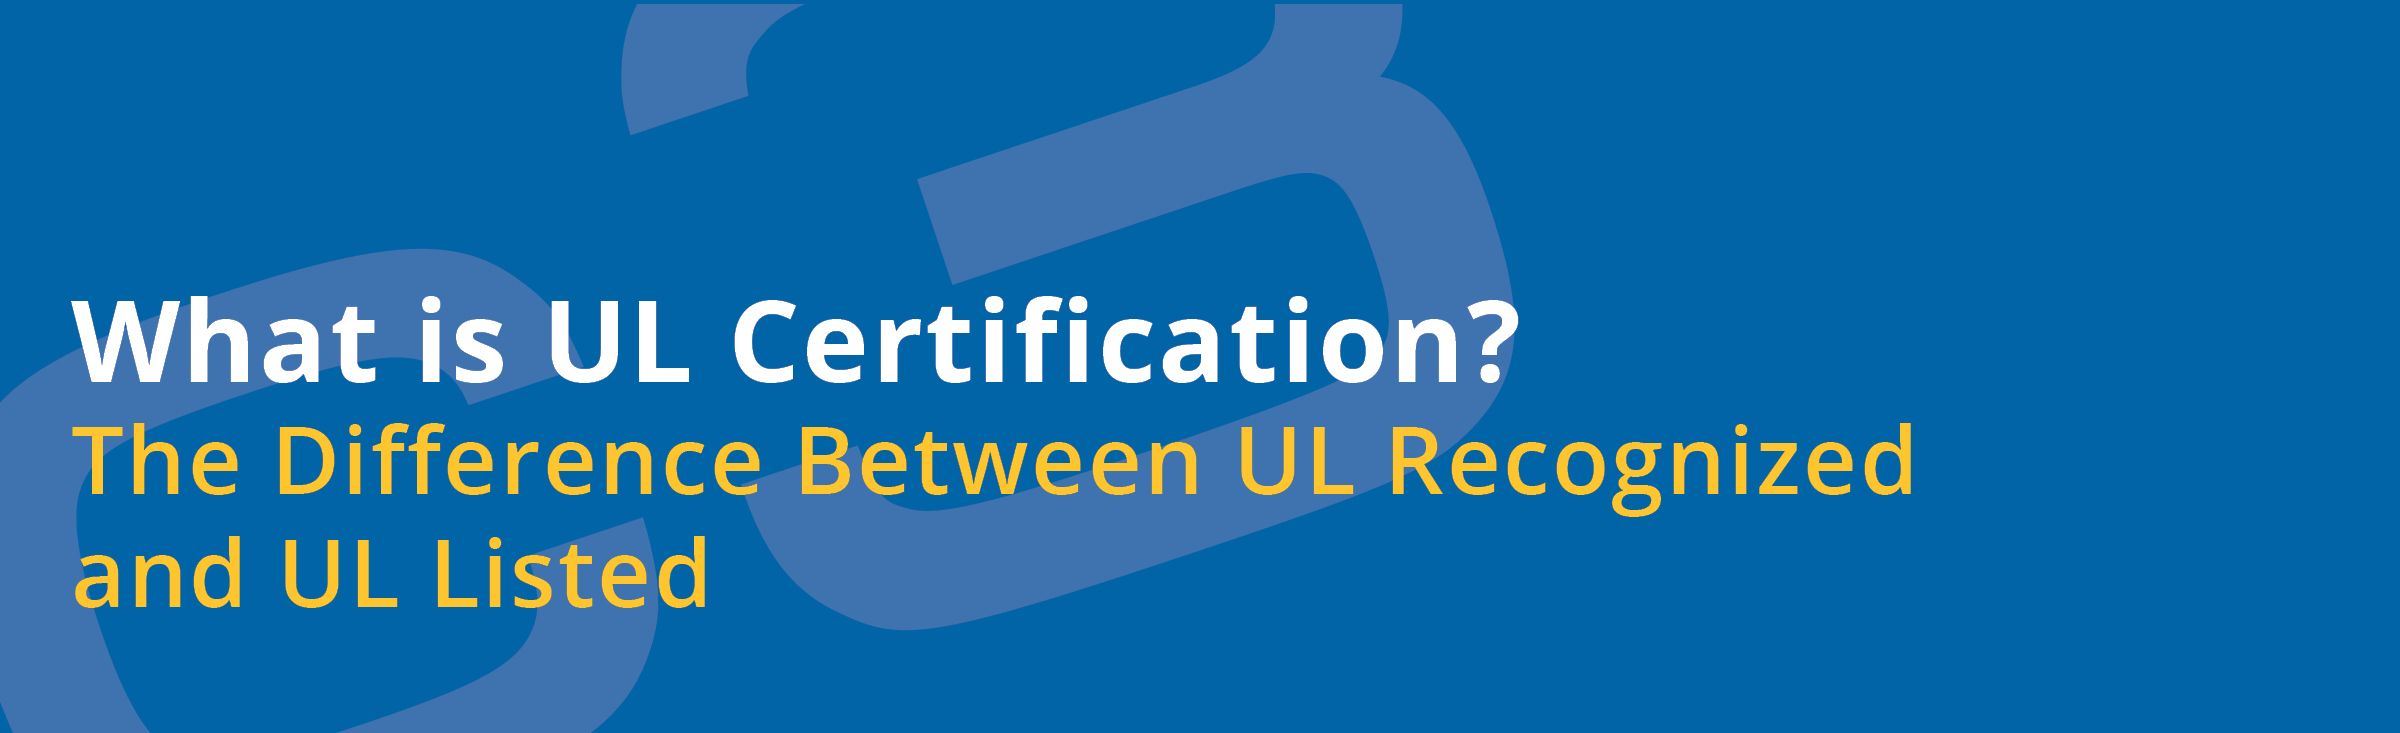 What Is Ul Certification? Ul Recognized Vs Ul Certified - C3Controls